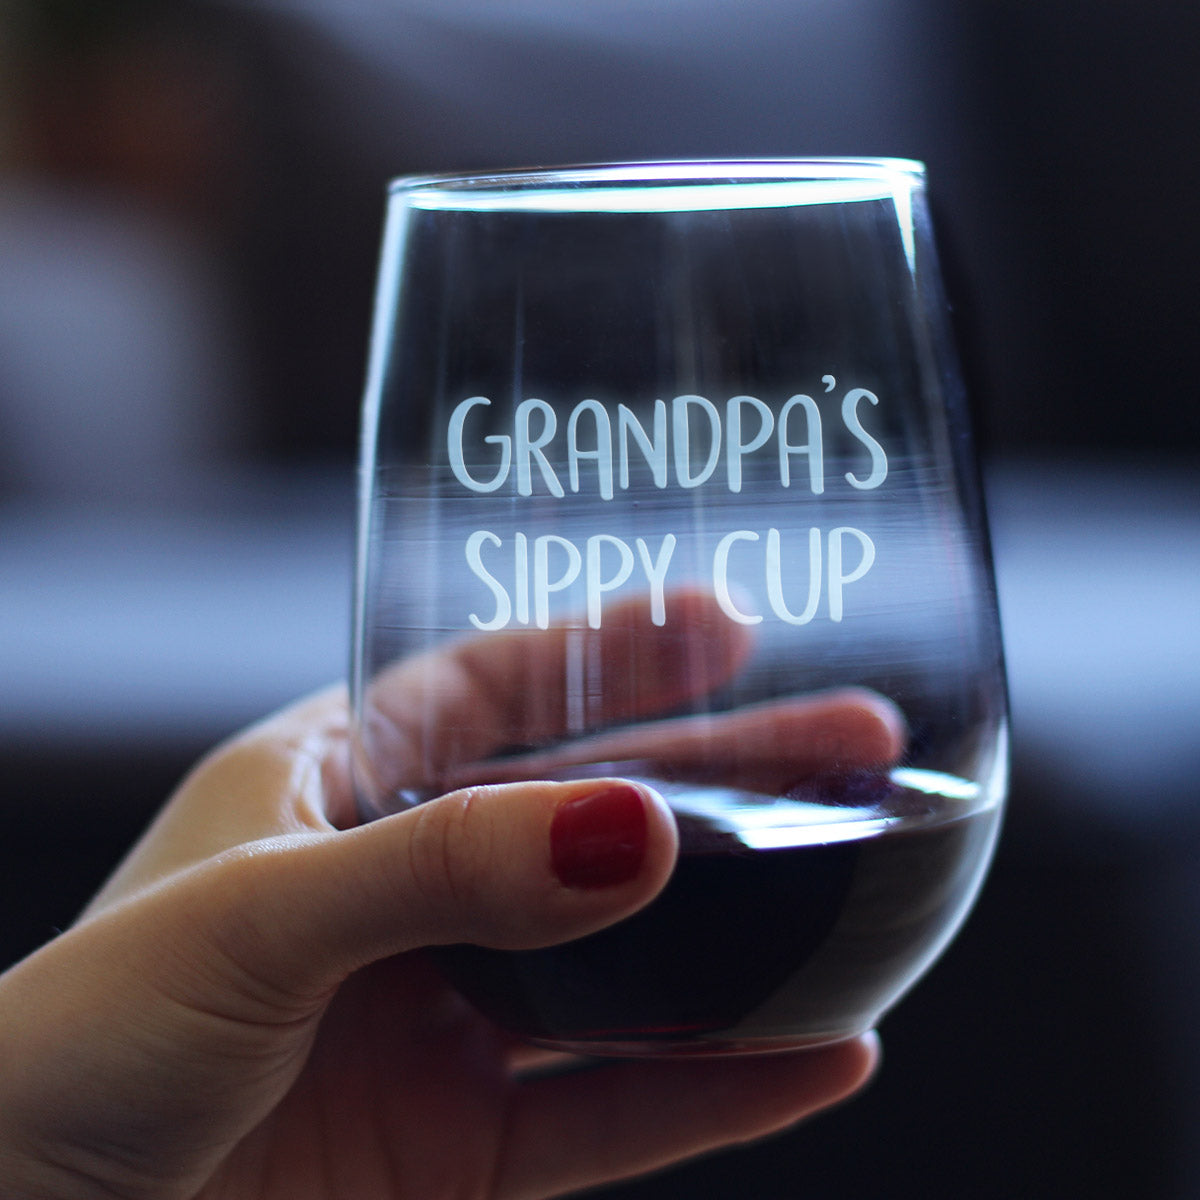 Grandpa&#39;s Sippy Cup - Stemless Wine Glass Gift for Grandfathers - Fun Birthday Glasses - Large